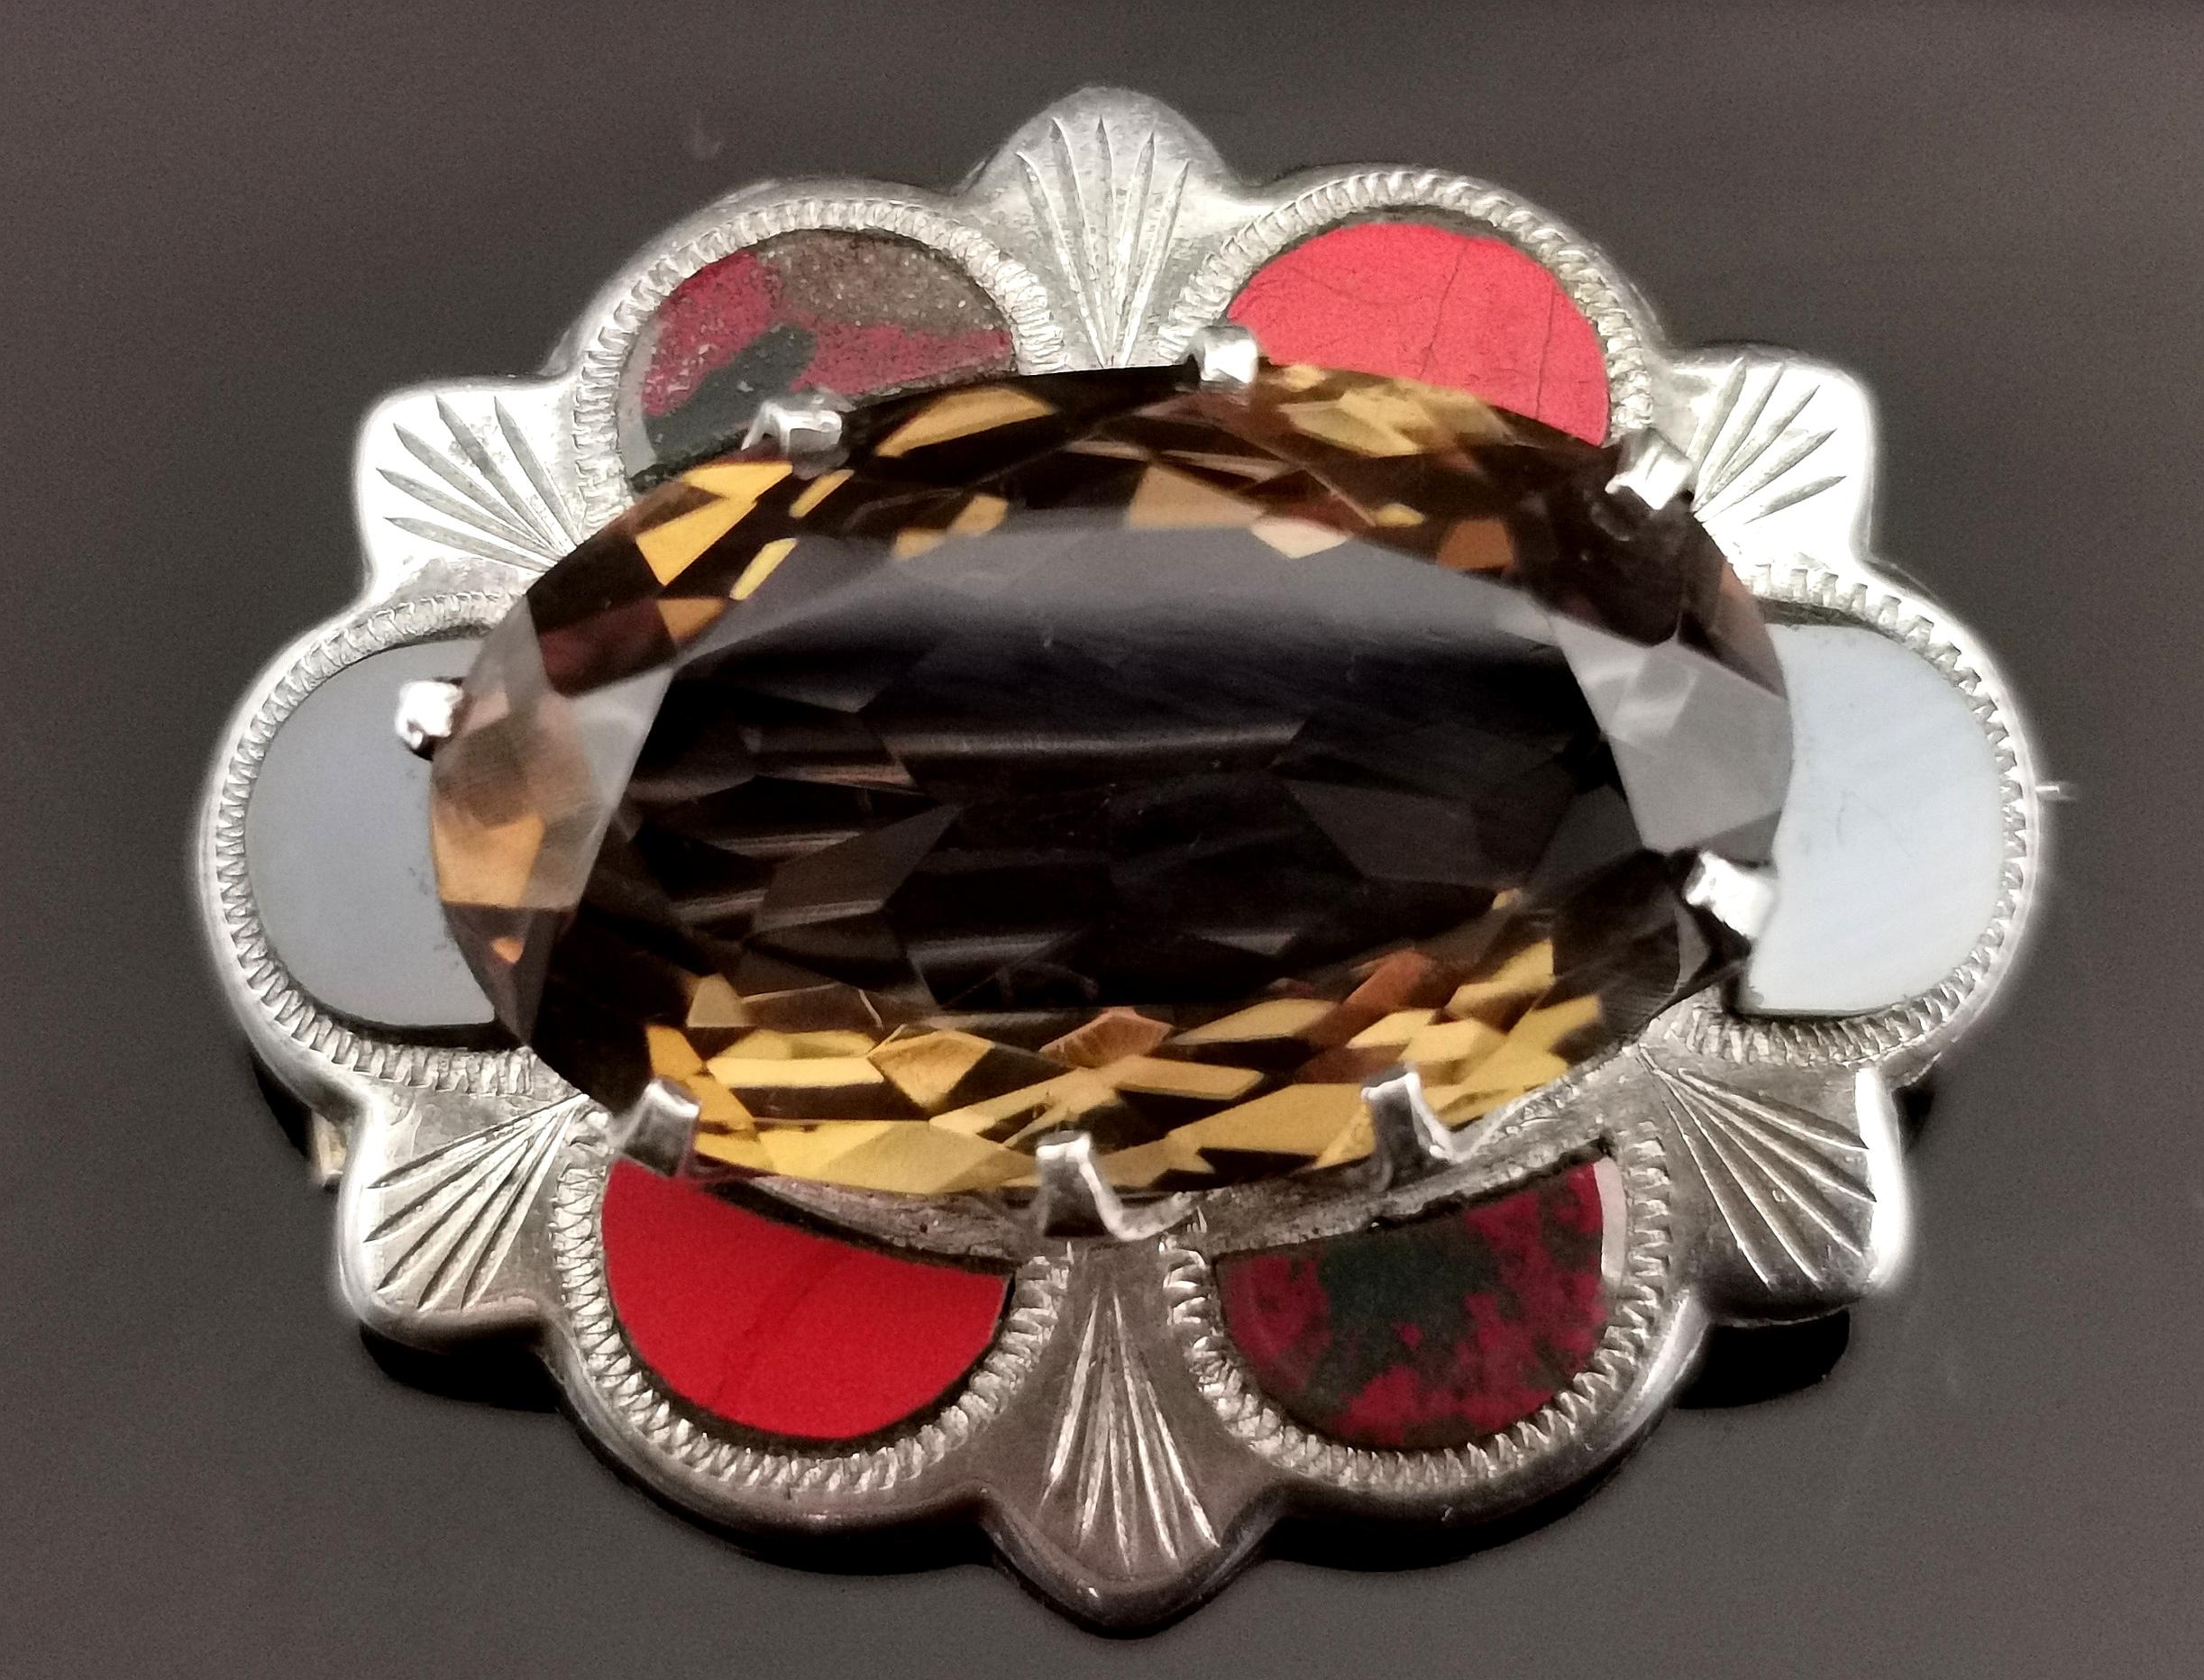 A gorgeous vintage Scottish sterling silver, agate and smoky quartz brooch.

Modelled on the designs of the Victorian Scottish agate pieces this attractive brooch is a scalloped oval shape, set to the centre with a large faceted oval smoky